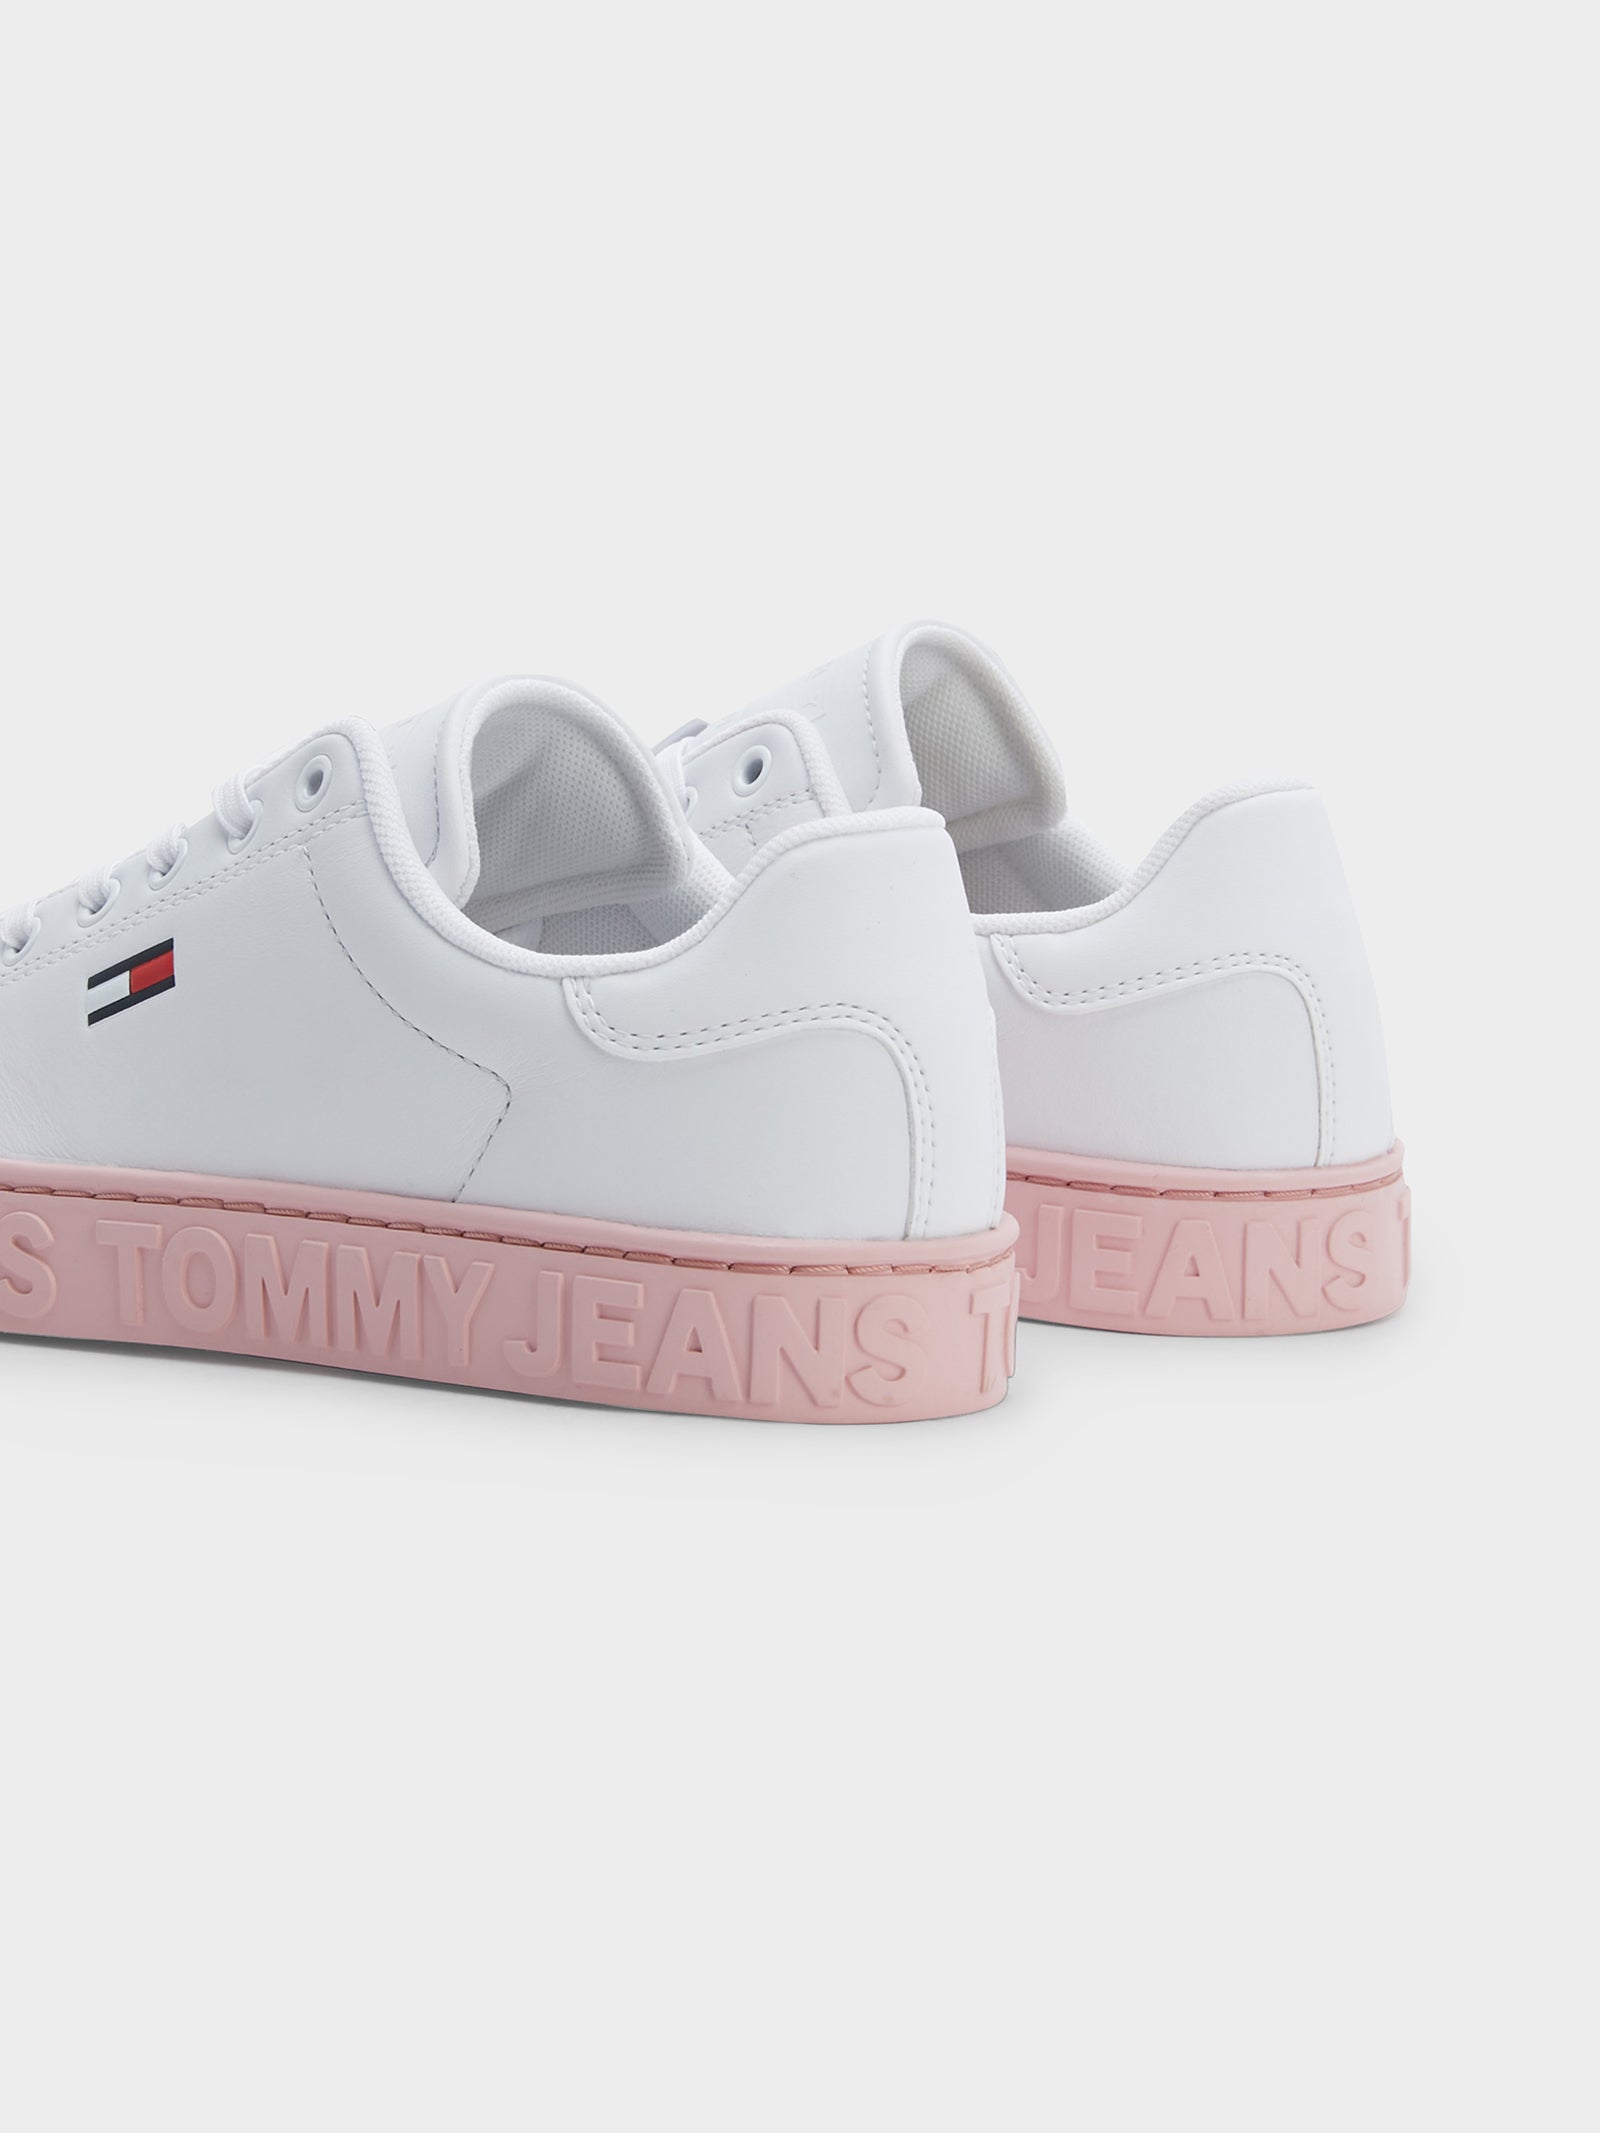 Womens Embossed Logo Cupsole Trainers in White & Pink